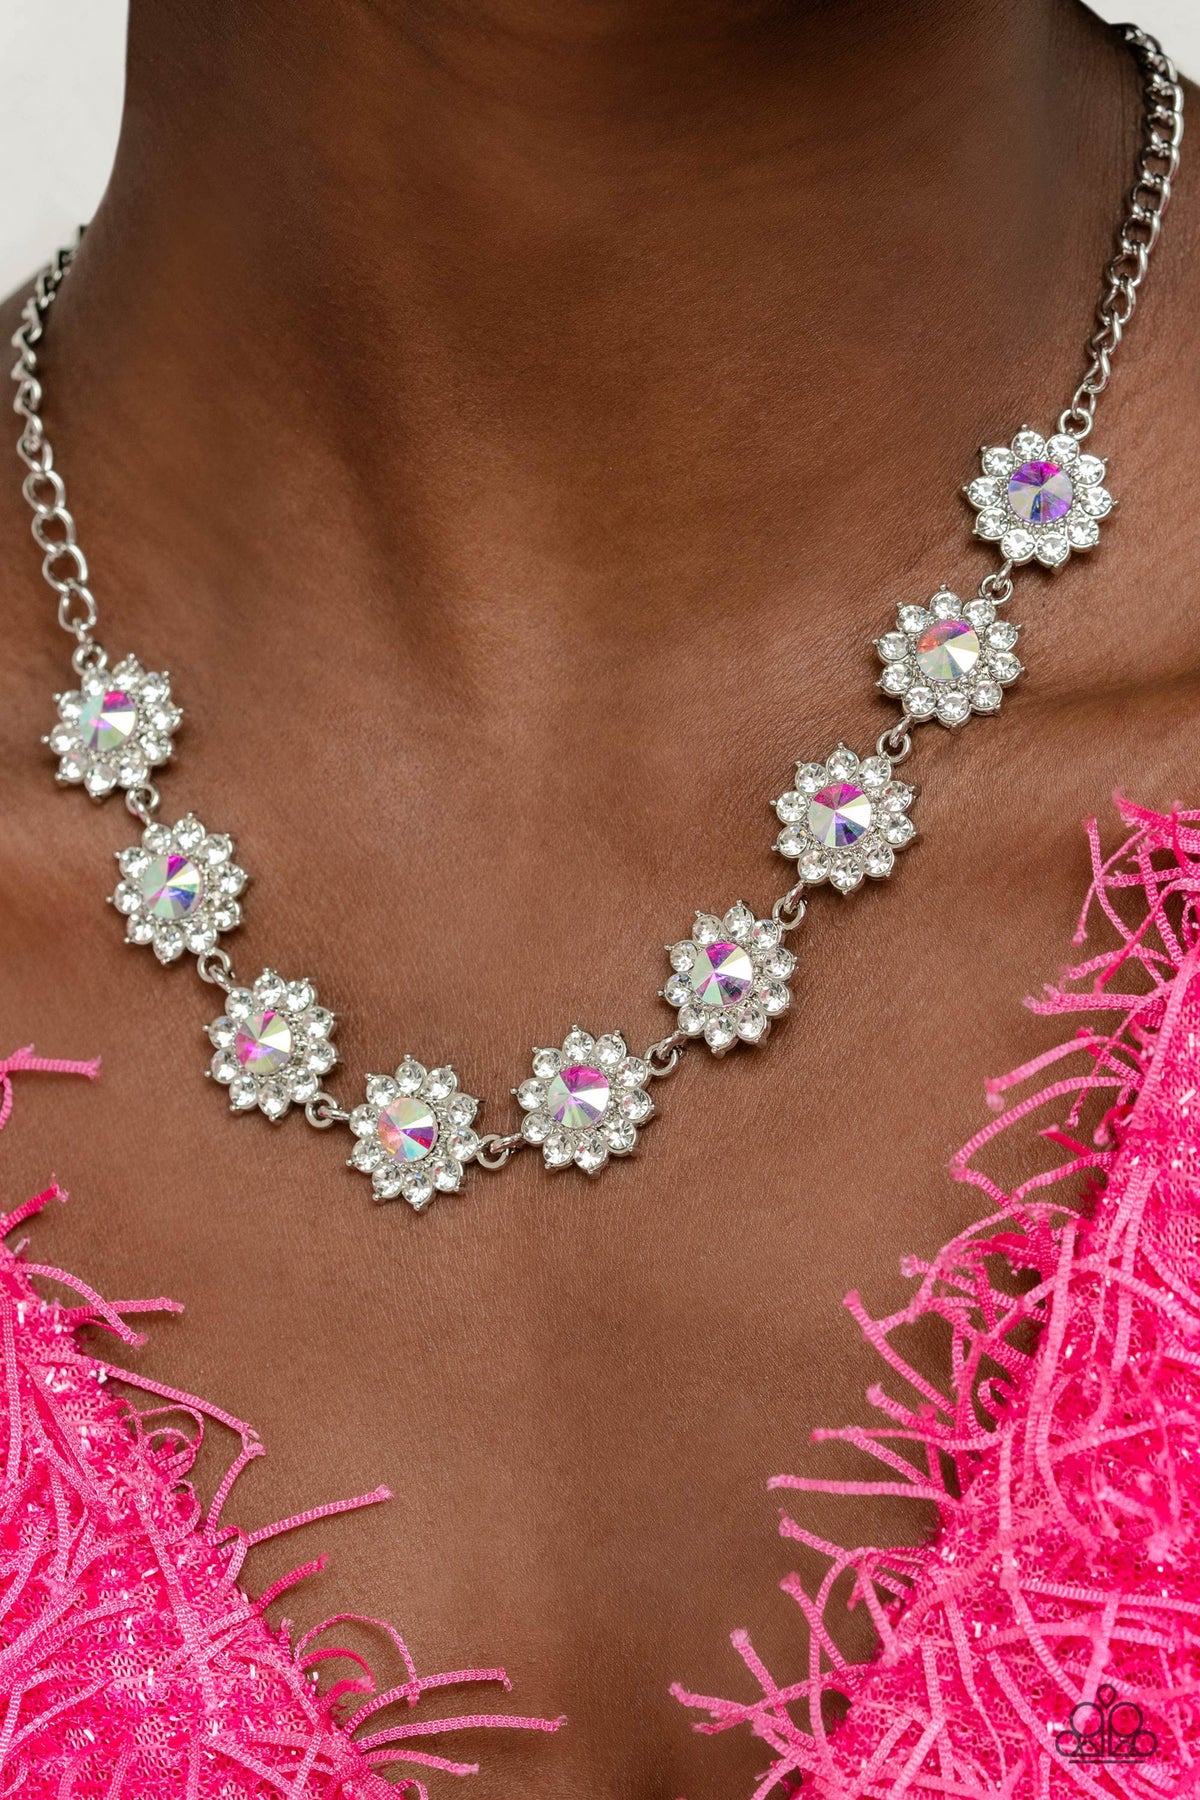 Blooming Brilliance Multi Iridescent Rhinestone Necklace - Paparazzi Accessories-on model - CarasShop.com - $5 Jewelry by Cara Jewels